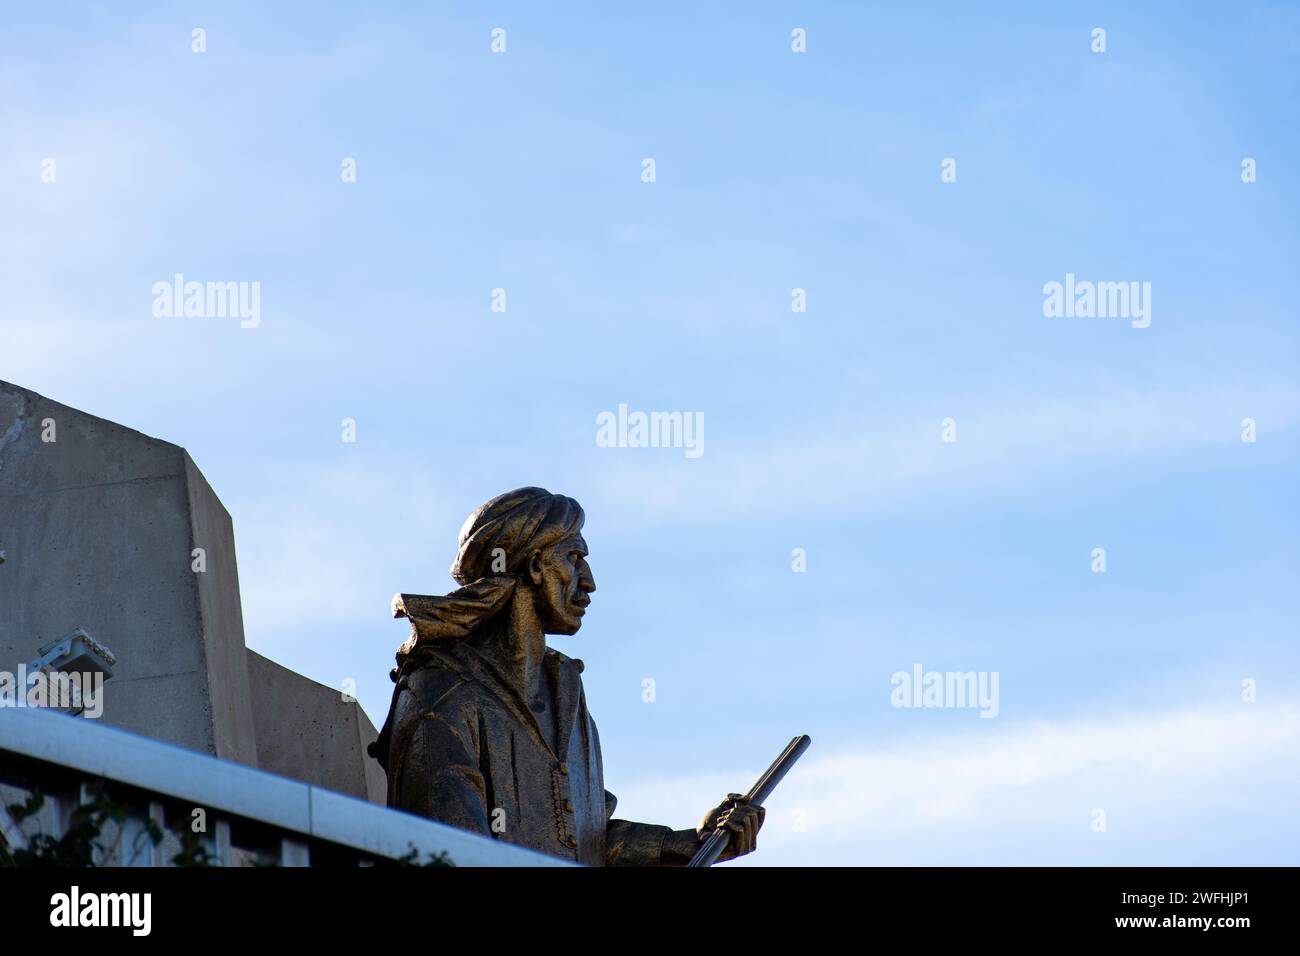 Low-angle view of a soldier statue holding a gun in the Maqam Echahid monument against a blue sky. Stock Photo